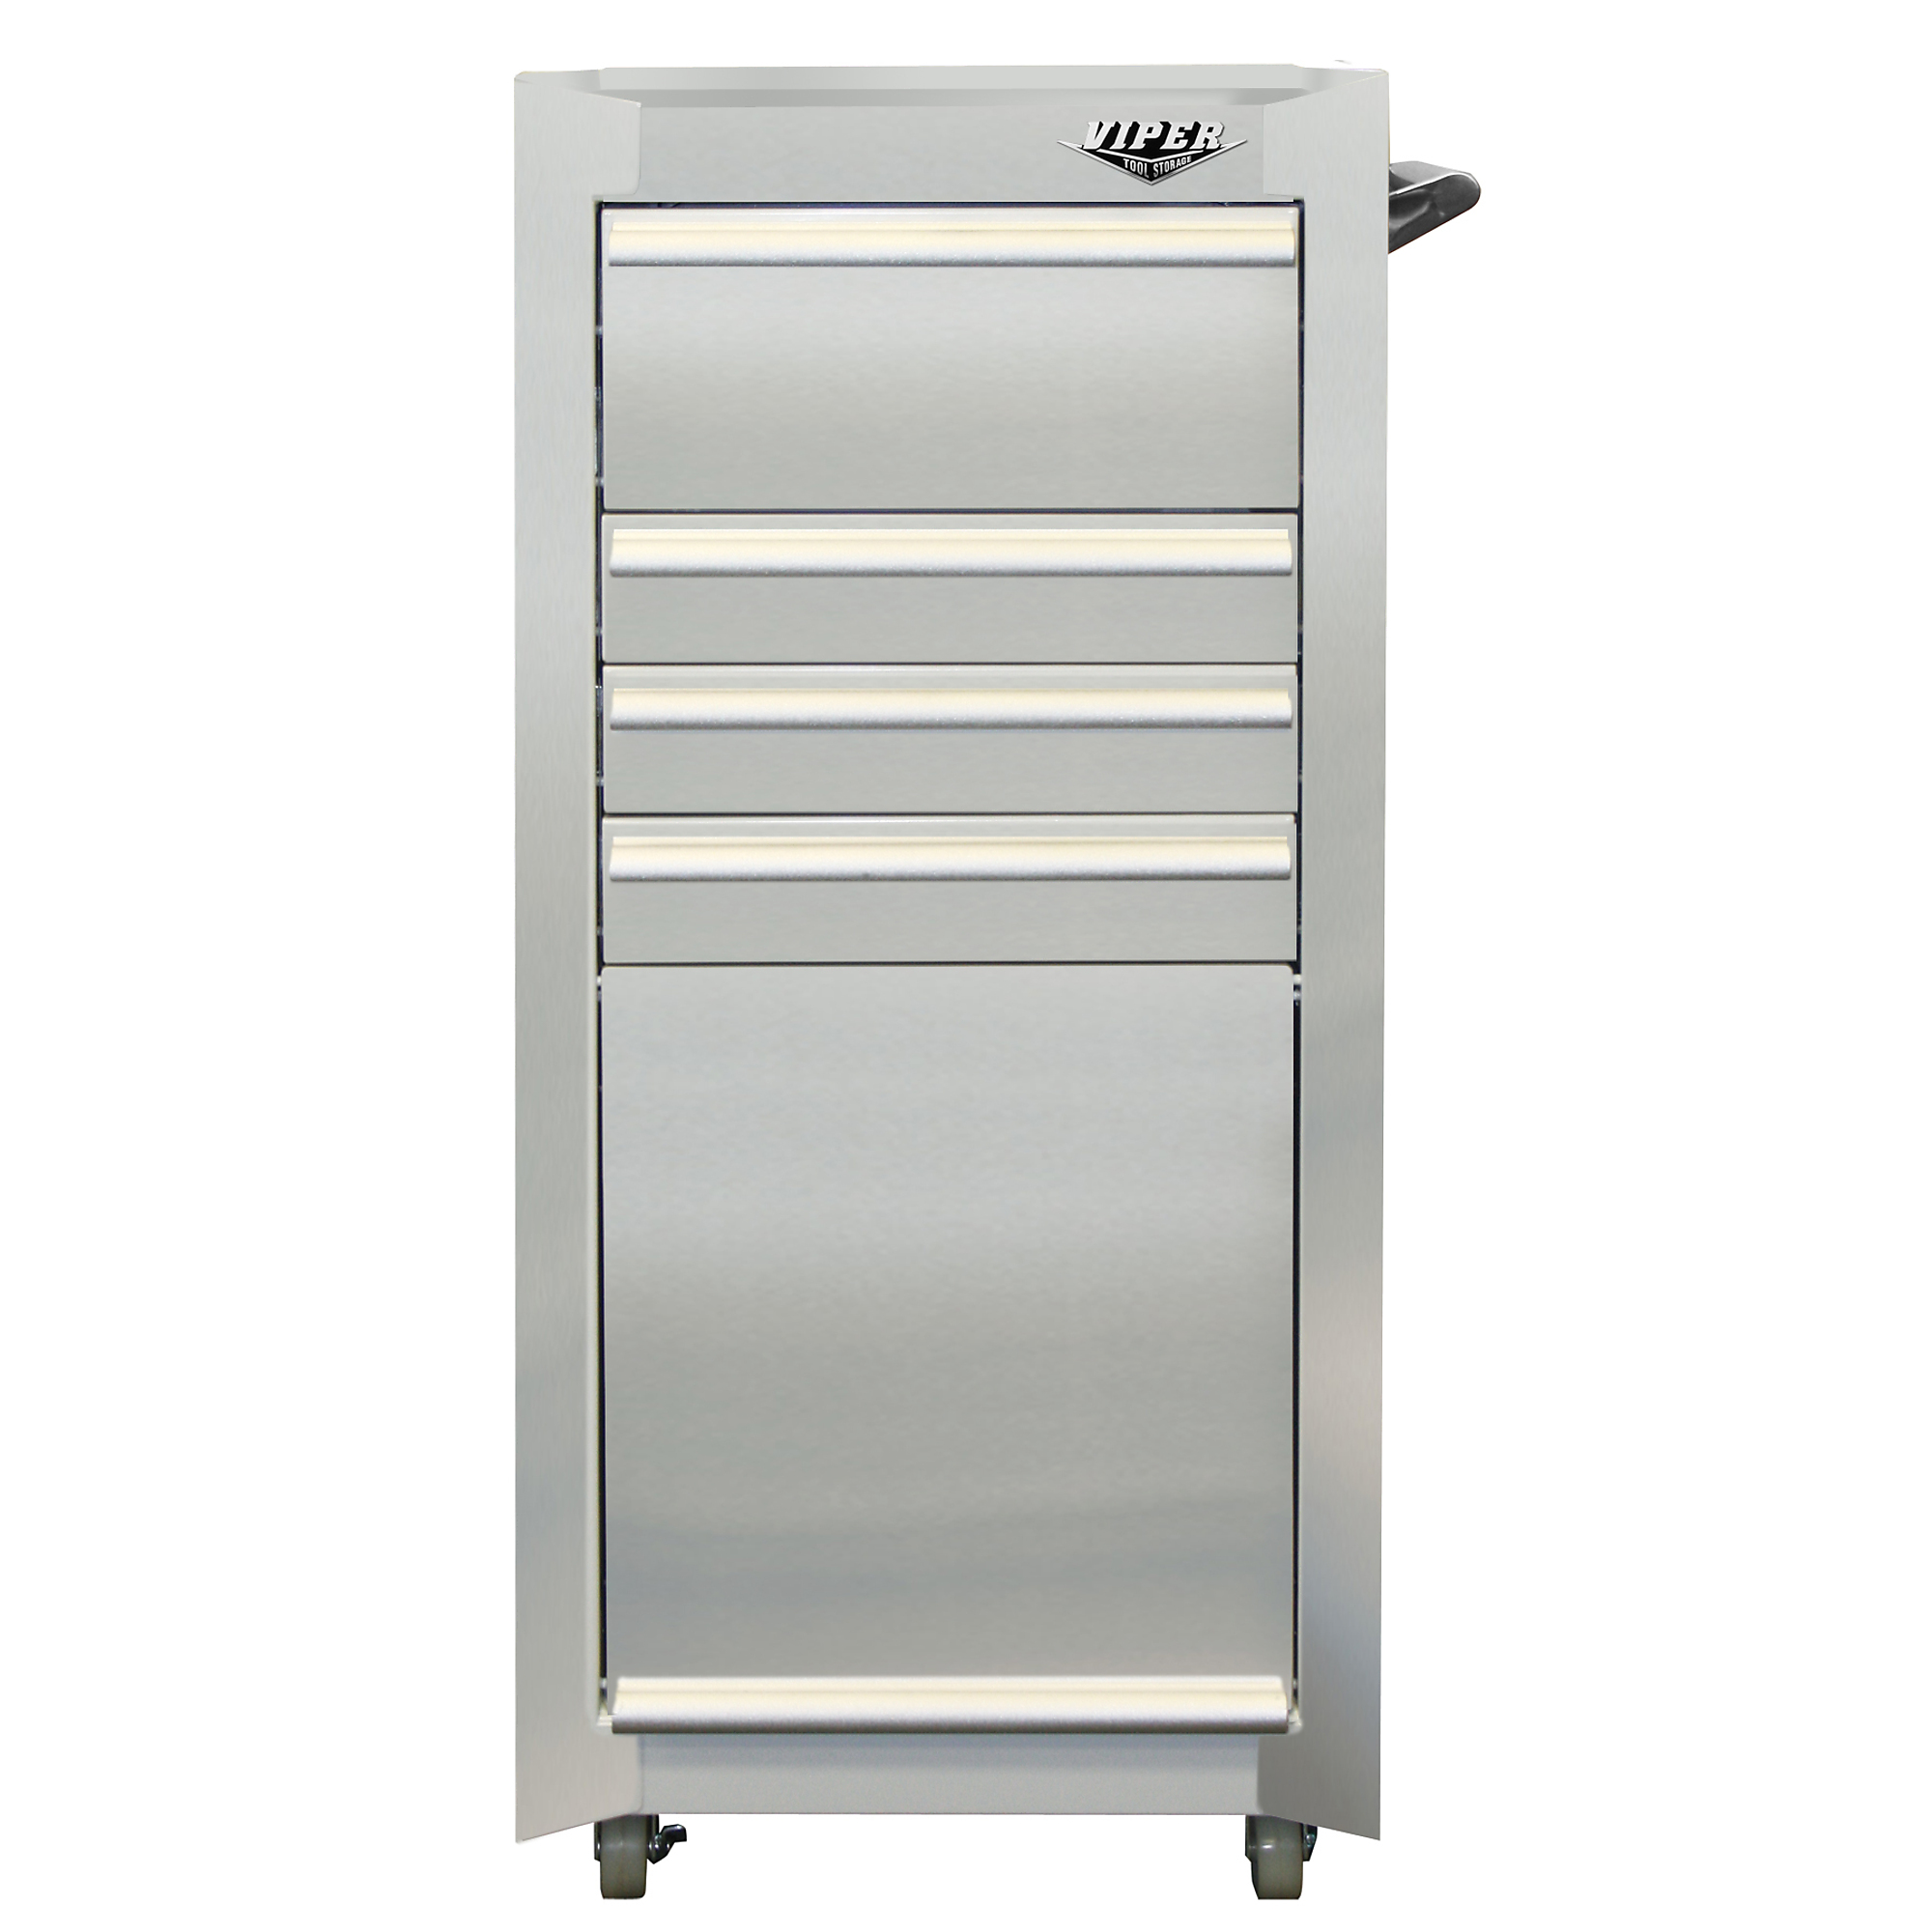 Viper Tool Storage, 4-Drawer Stainless Steel Cart with Bulk Storage, Width 16 in, Height 36.5 in, Color Stainless Steel, Model V1804SSR